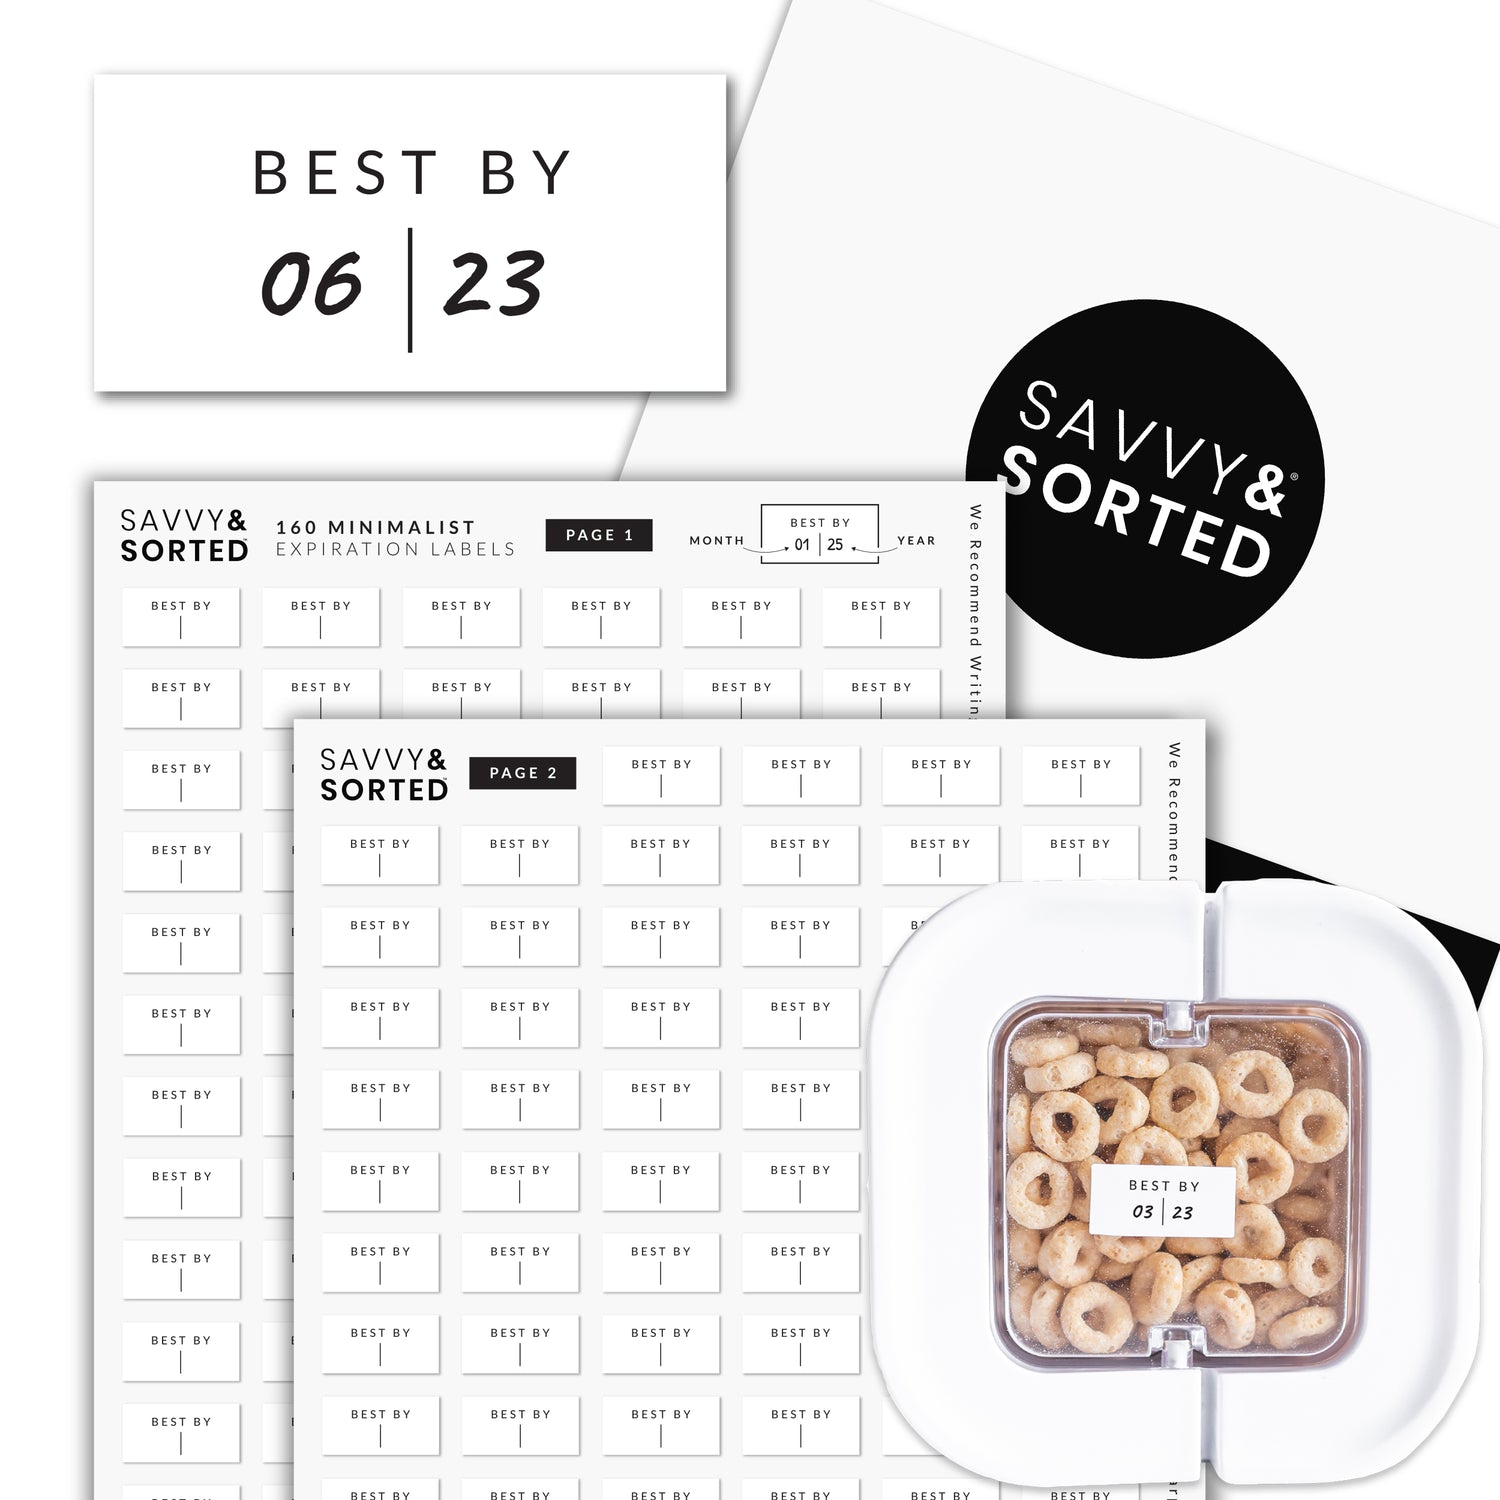 White Expiration - 160 Labels - Savvy &amp; Sorted